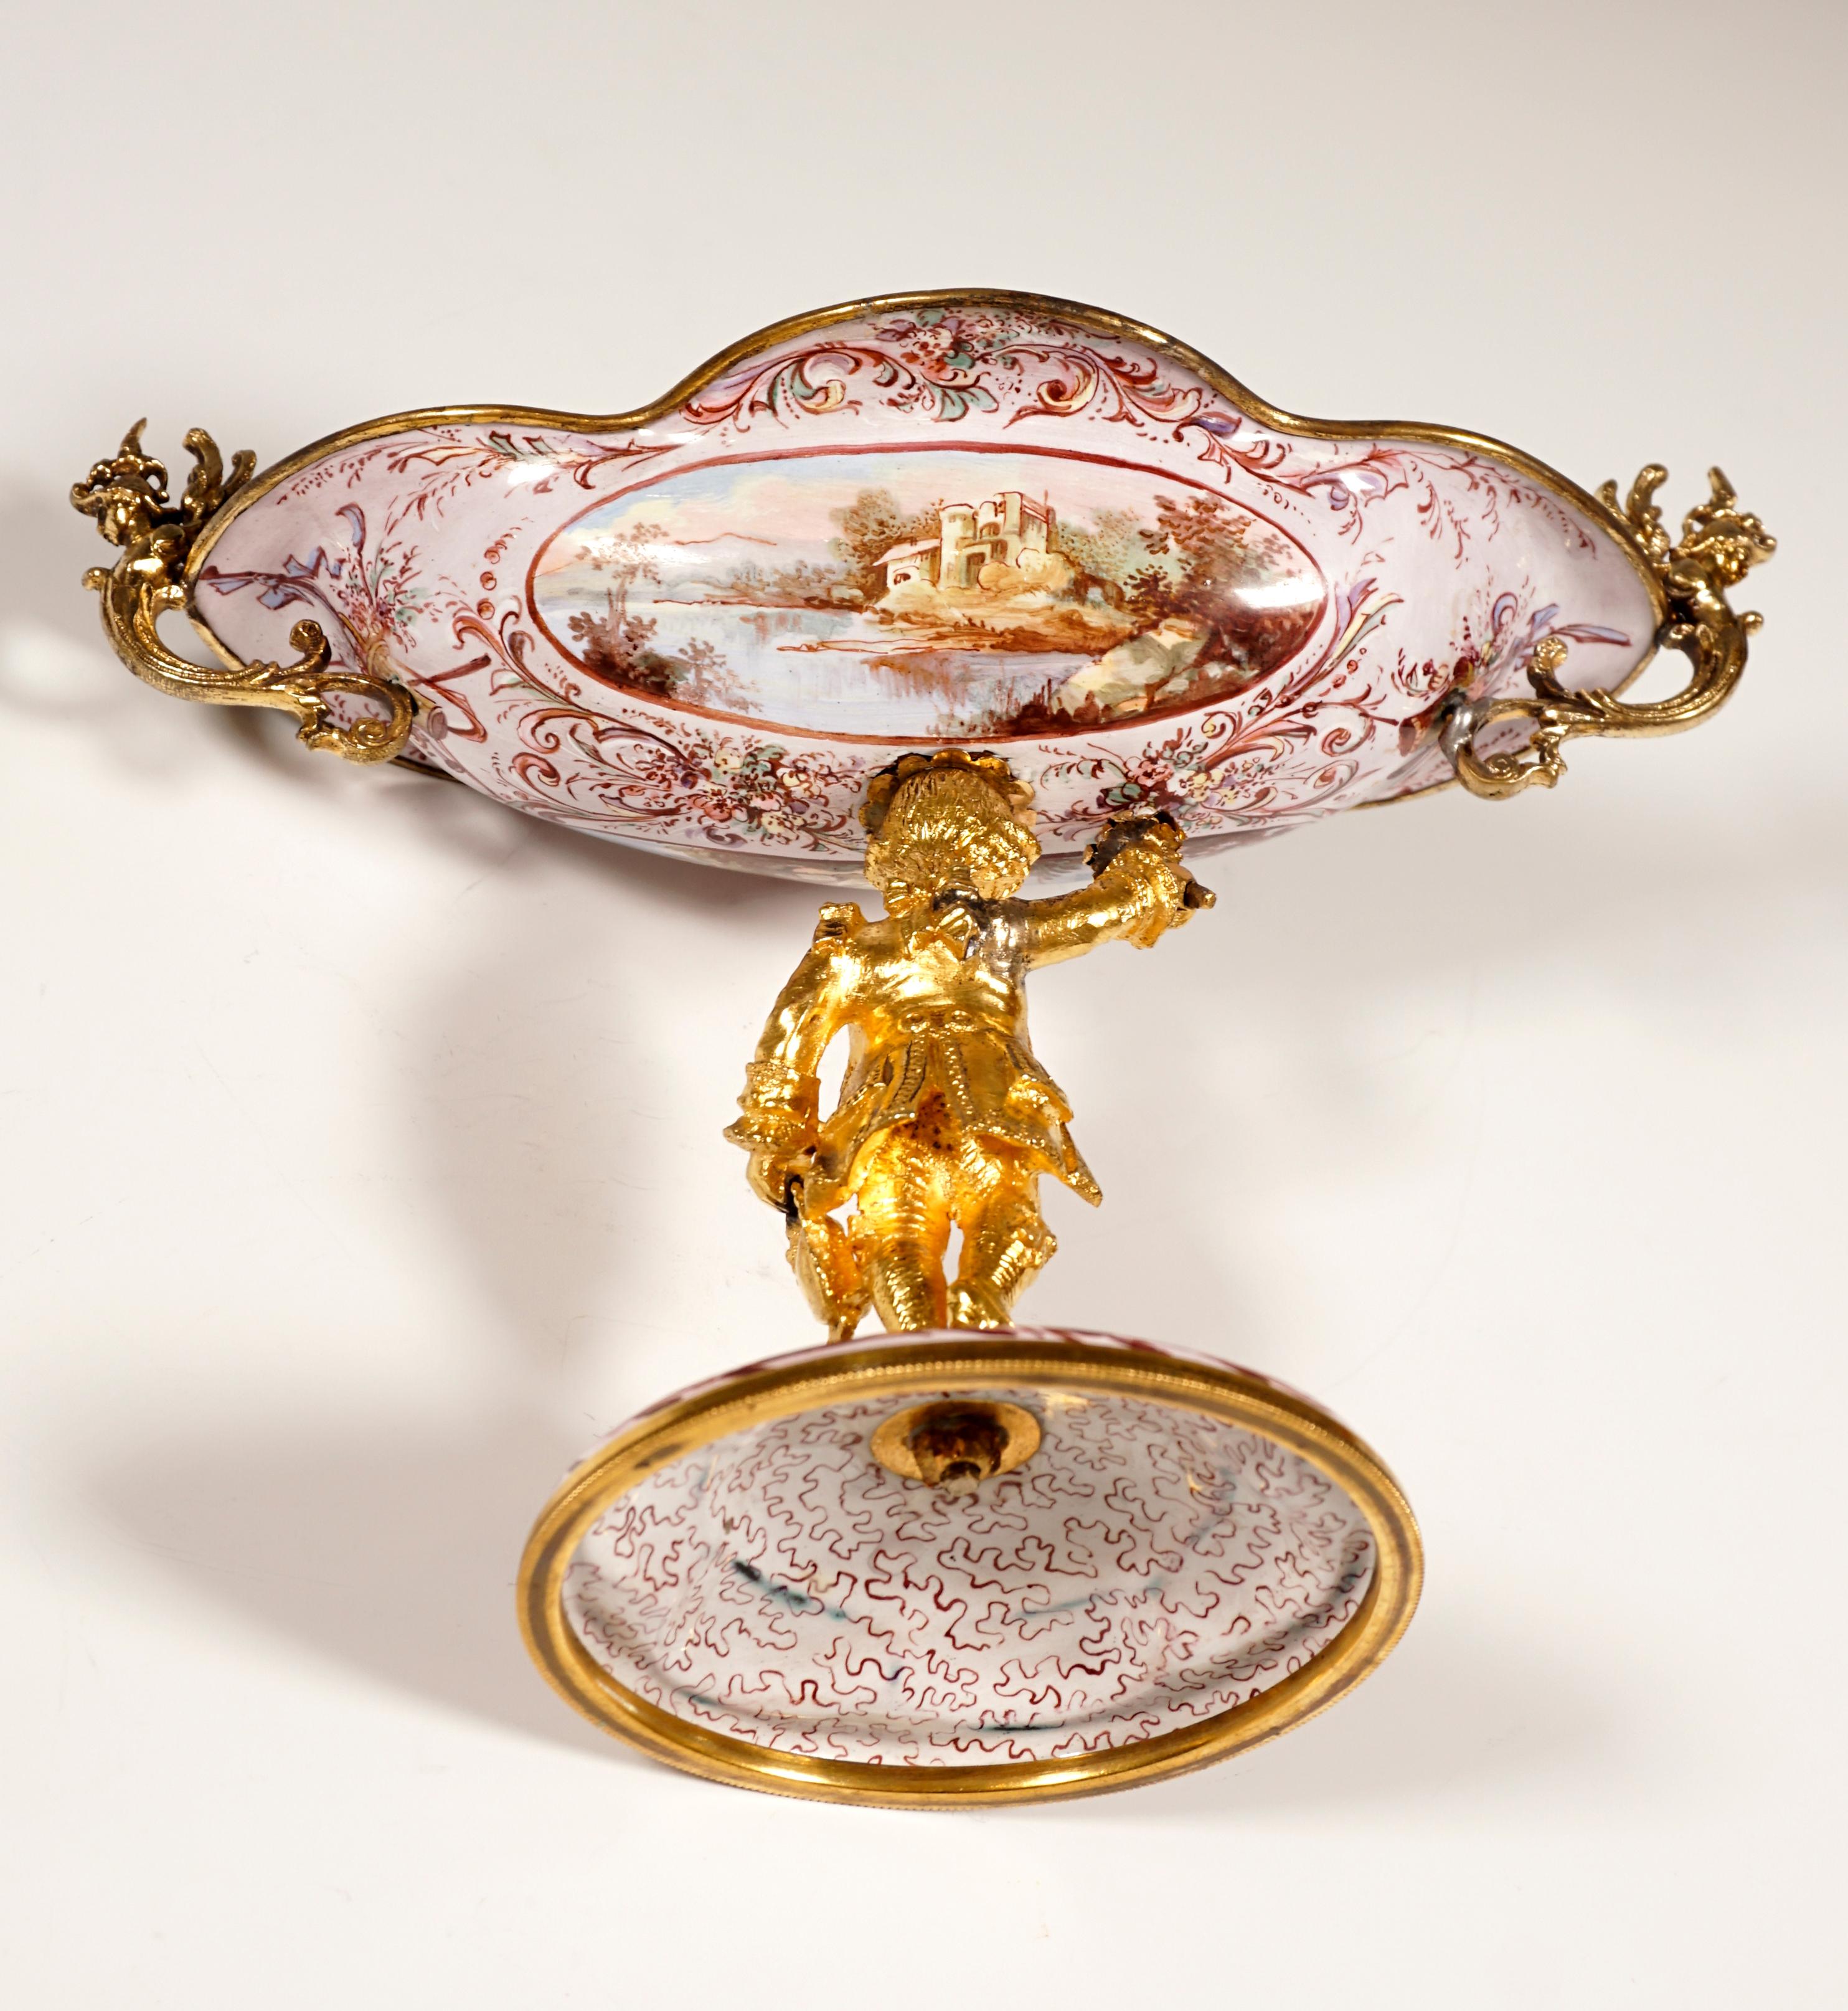 Enameled 19th Century Viennese Enamel Centerpiece with Watteau and Arabesque Painting For Sale